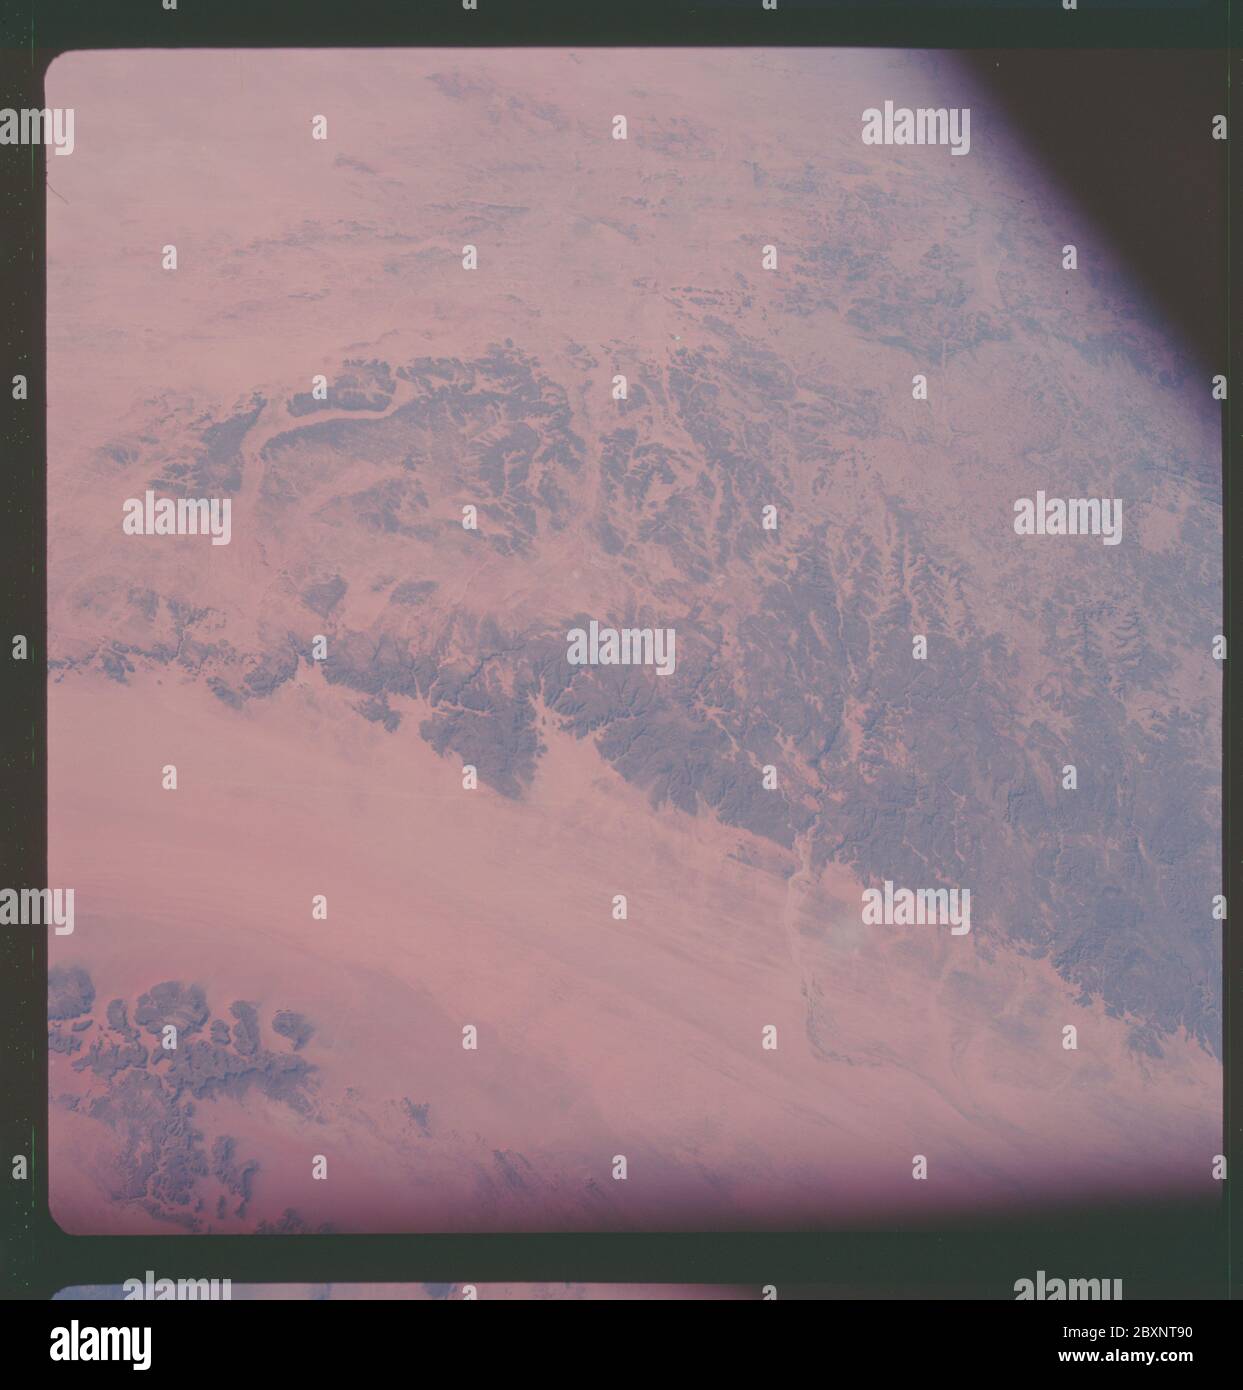 AS07-11-1998 - Apollo 7 - Apollo 7 Mission, Africa; Scope and content:  The original database describes this as: Description: Apollo 7,Chad,Sudan,Libya Enmedi Plateau,Mourdi Depression. Low oblique. Cloud Cover 0%%. Altitude: 132 miles. Latitude: 17' degrees 30' North,Longitude: 23' degrees 00' East. Original film magazine was labeled P. Camera Data: Hasselblad 500-C; Lens: Zeiss Planar,F/2.8,80mm; Film Type: Kodak SO-121,Aerial Ektachrome; Filter: None. Flight Date: October 11-12. 1968. Subject Terms: Apollo 7 Flight, Earth Observations (From Space), Africa, Chad, Libya, Sudan Categories: Ear Stock Photo